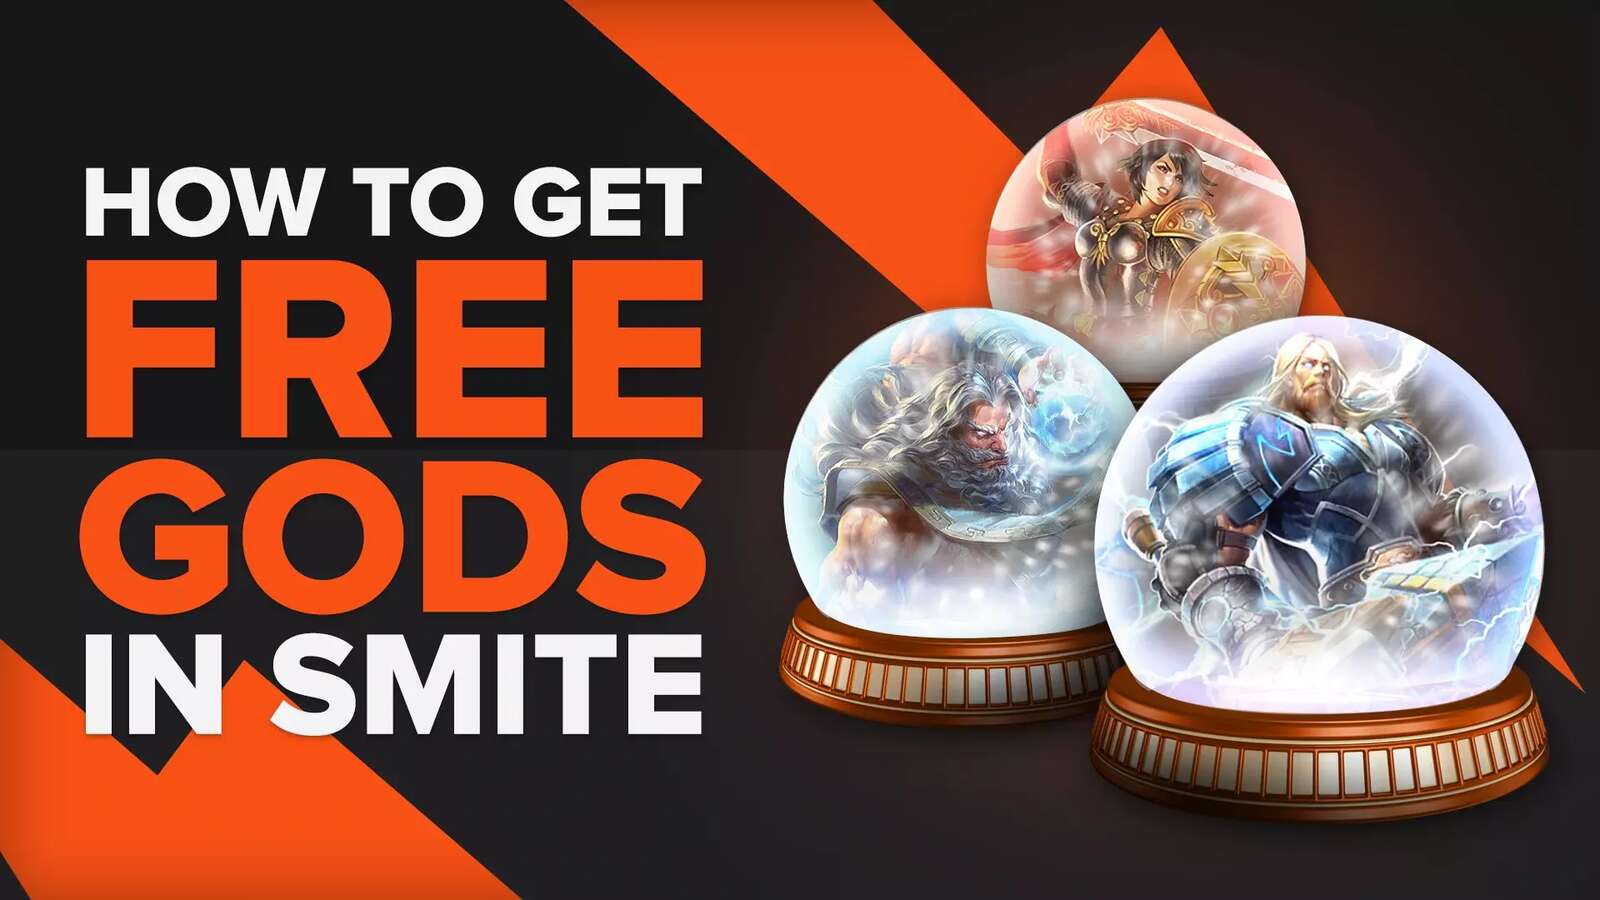 How To Get Free Gods in Smite To Grow Your Pantheon [6 Ways]